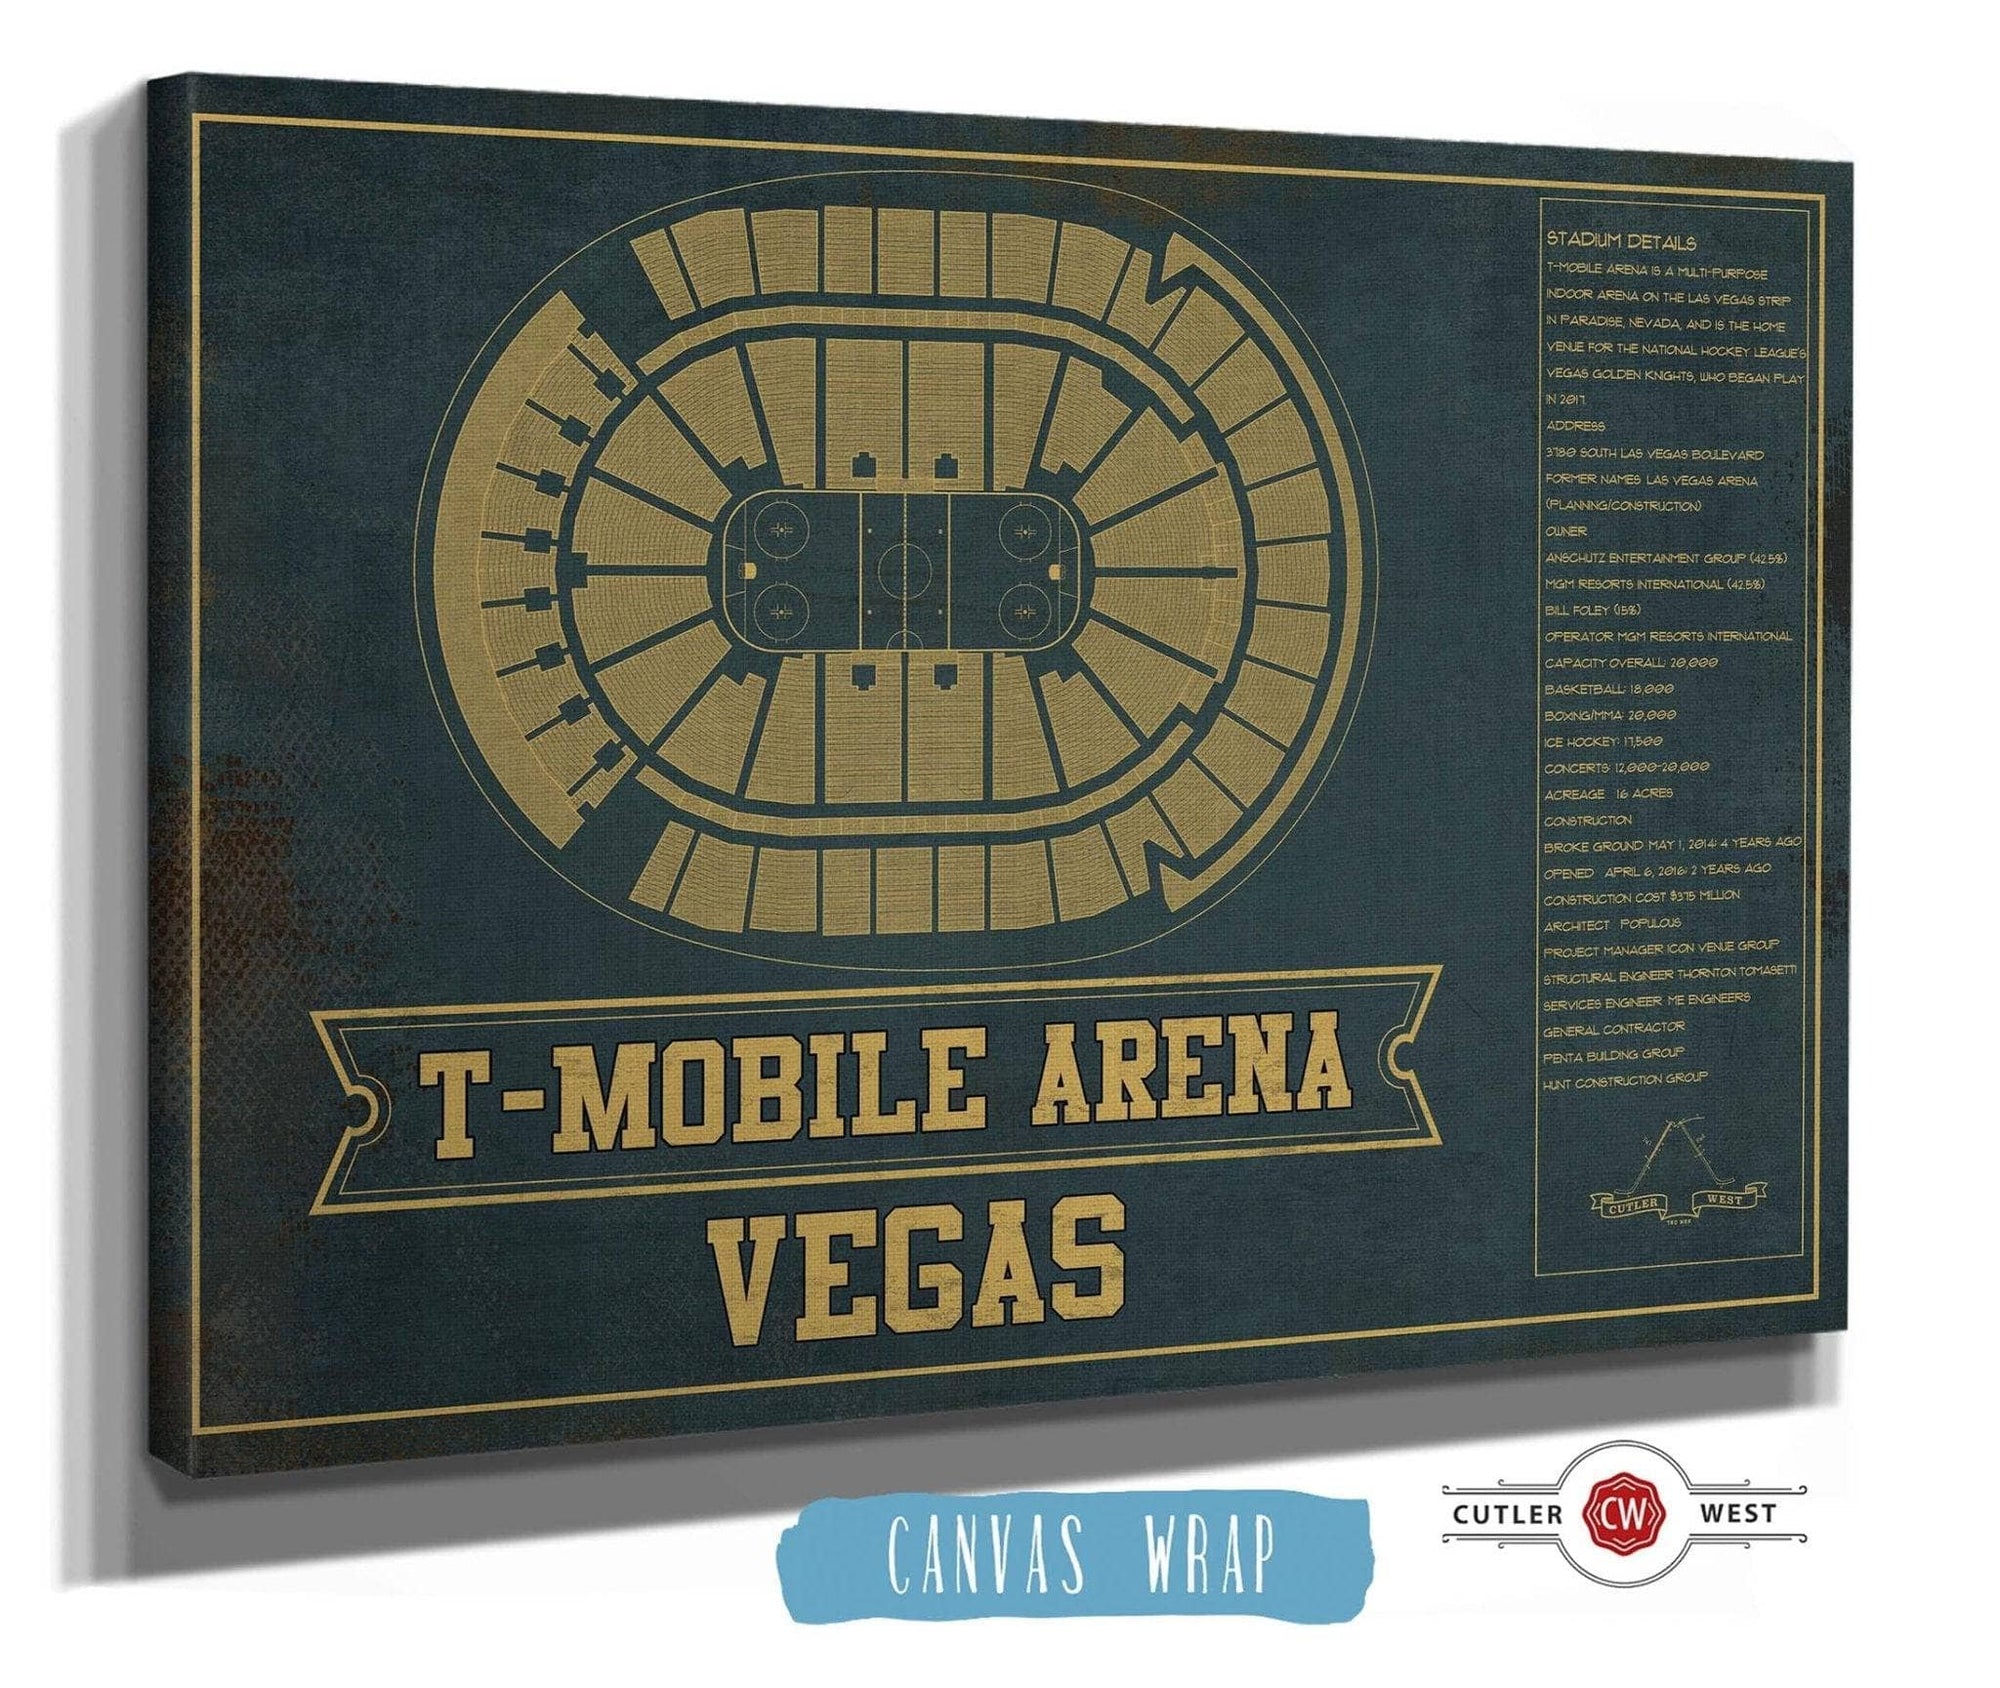 Cutler West 14" x 11" / Stretched Canvas Wrap Vegas Golden Knights T-Mobile Arena Team Color Seating Chart - Vintage Hockey Print 673825529-TEAM